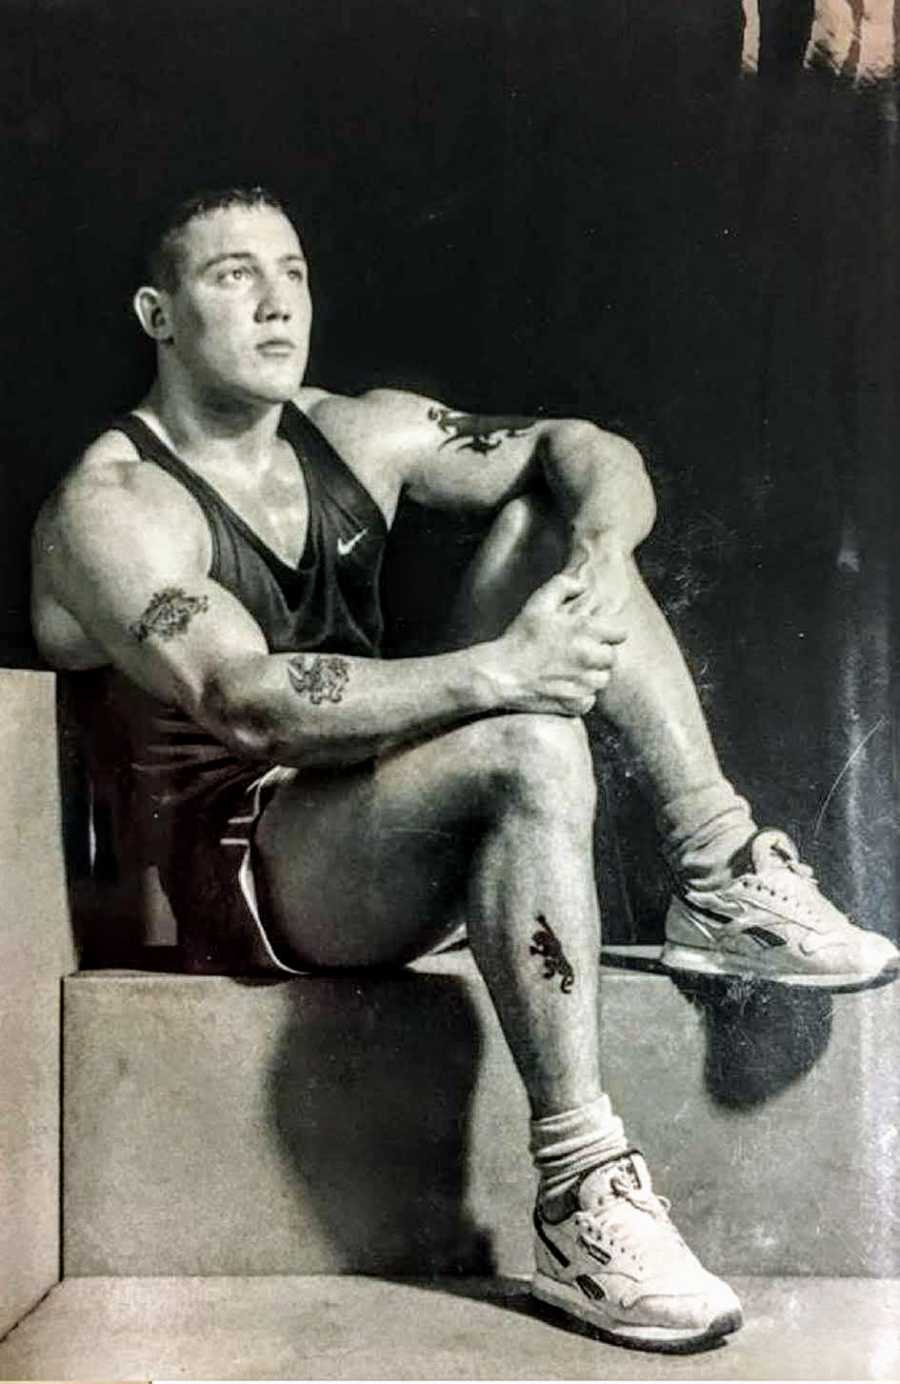 Muscular man sits posing on step with tattoos on arms and legs